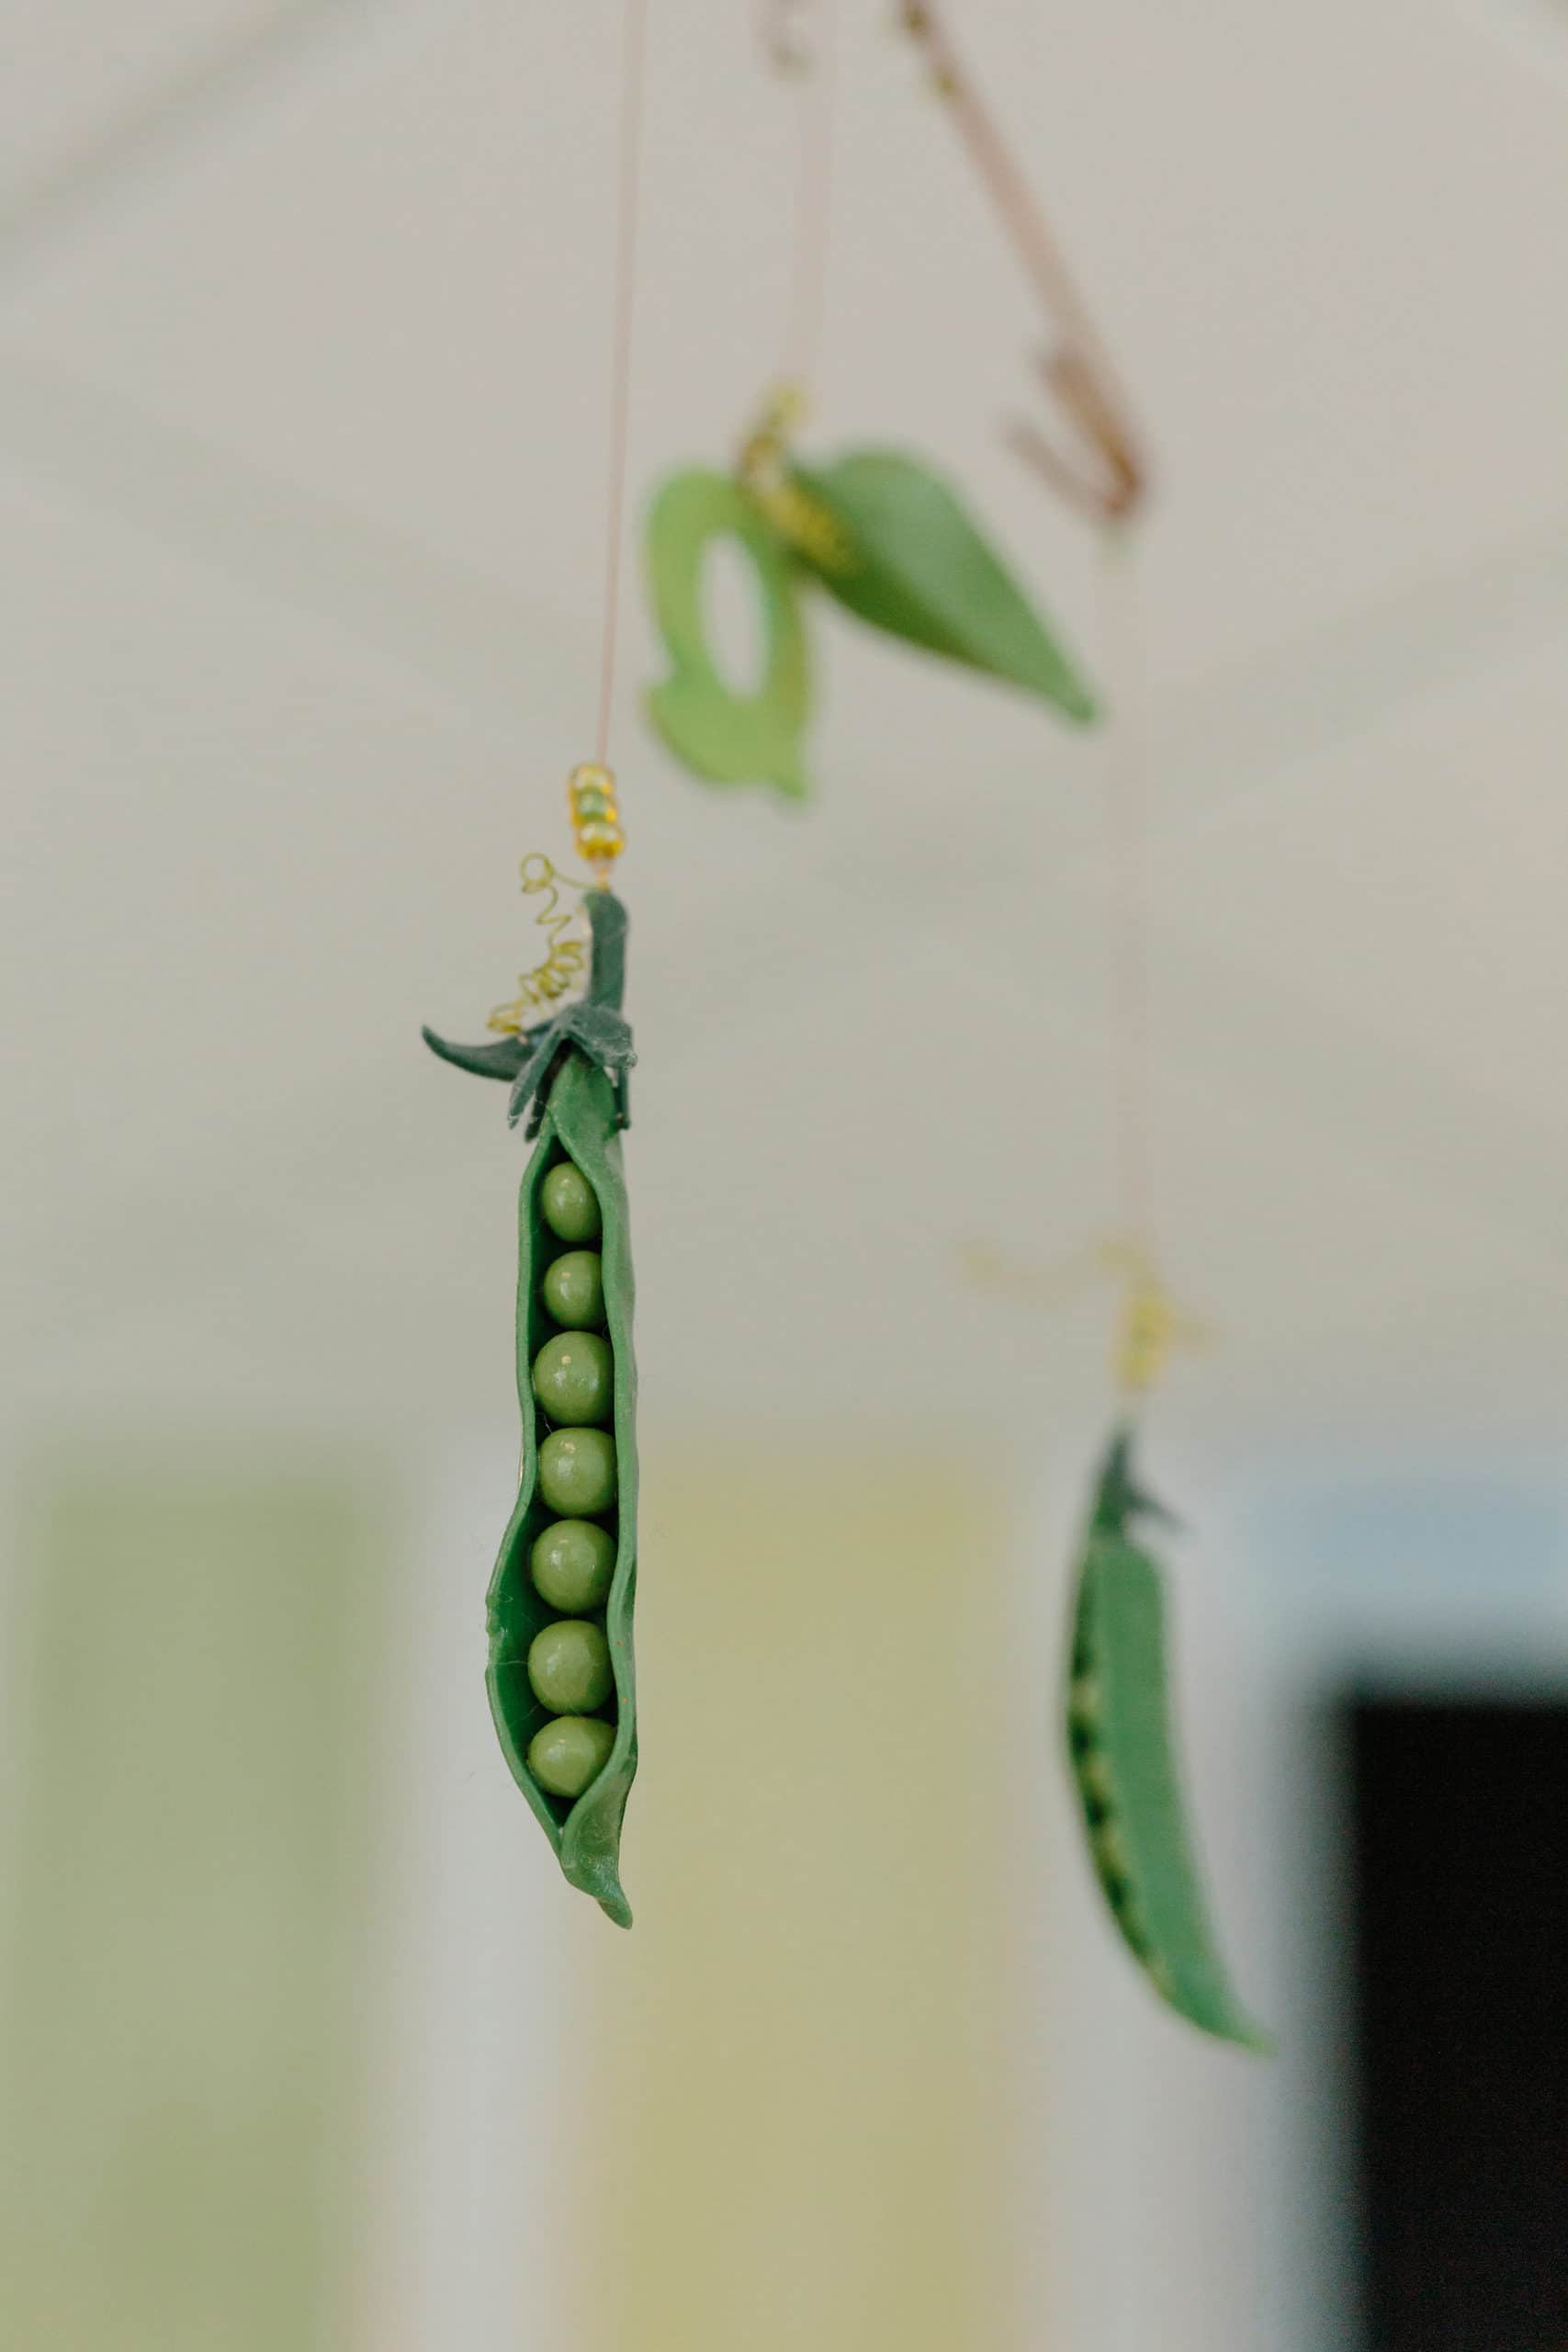 A close up of a ceiling mobile. Fake pea pods are hanging from its strings/